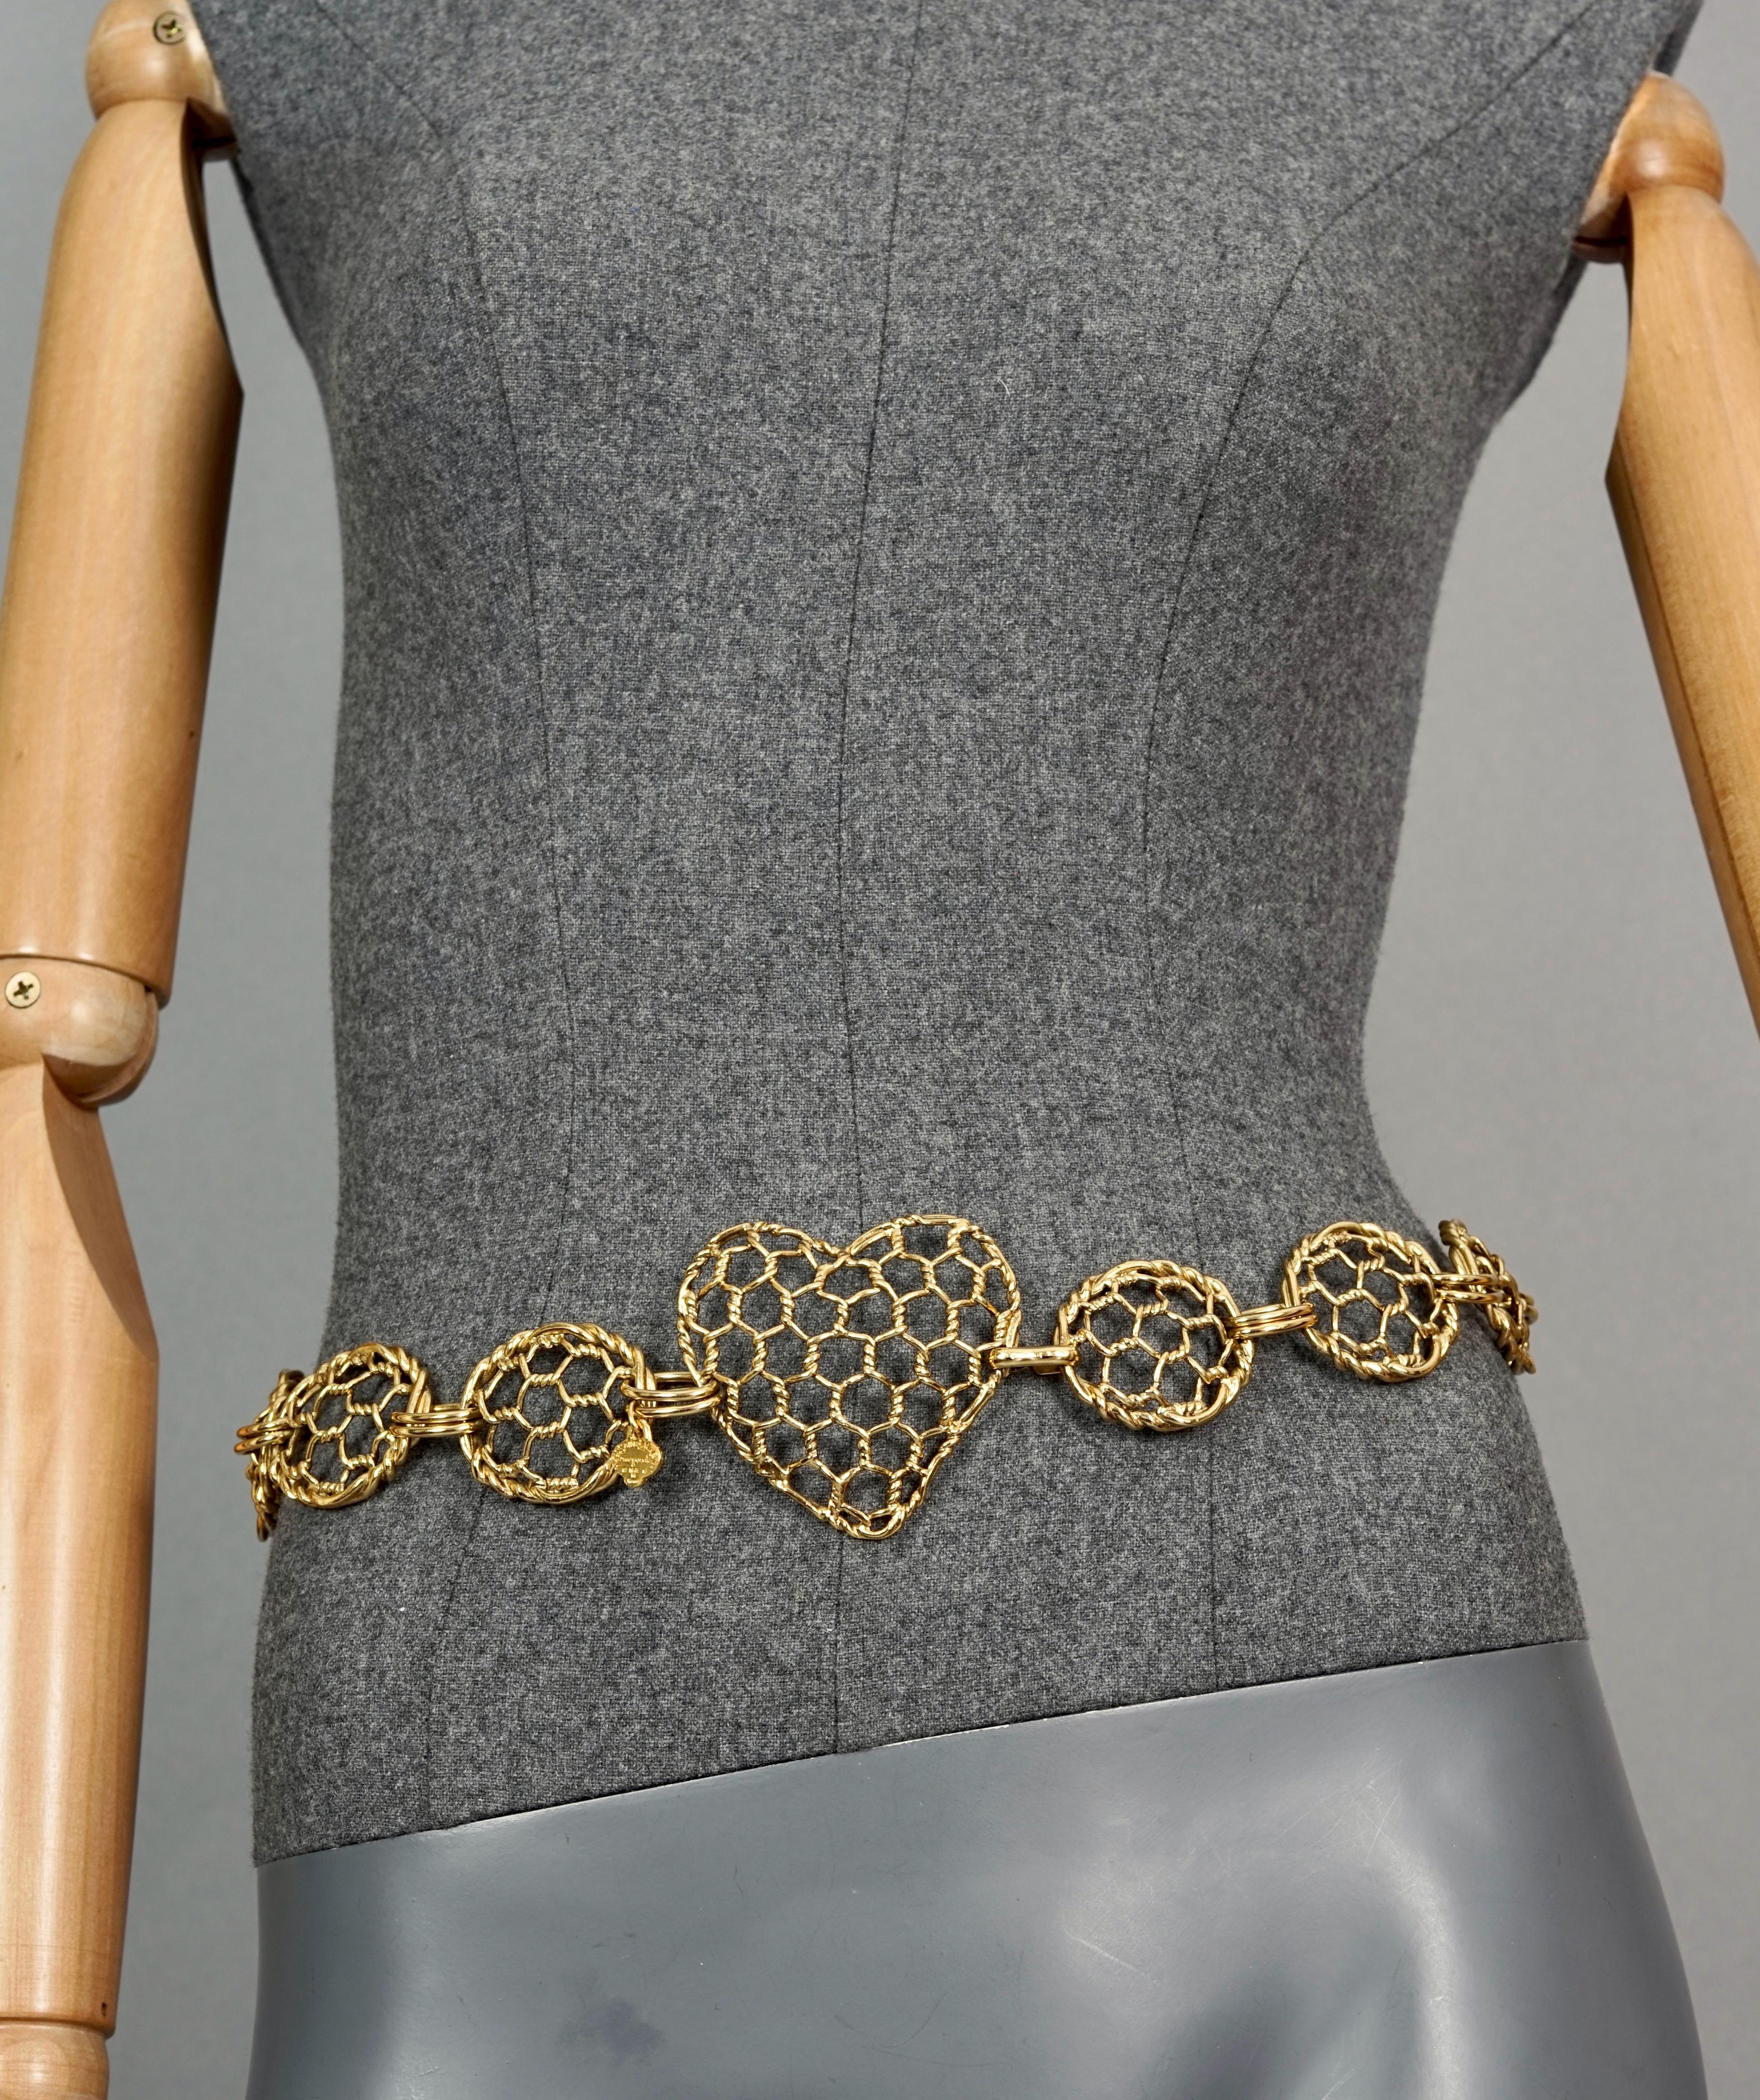 Vintage YVES SAINT LAURENT Ysl Heart Mesh Link Belt

Measurements:
Heart Buckle: 2.75 inches (7 cm)
Oval Links: 1.45 inches (3.7 cm)
Length: 27.95 inches (71 cm)

Features:
- 100% Authentic YVES SAINT LAURENT.
- Massive heart and oval mesh link